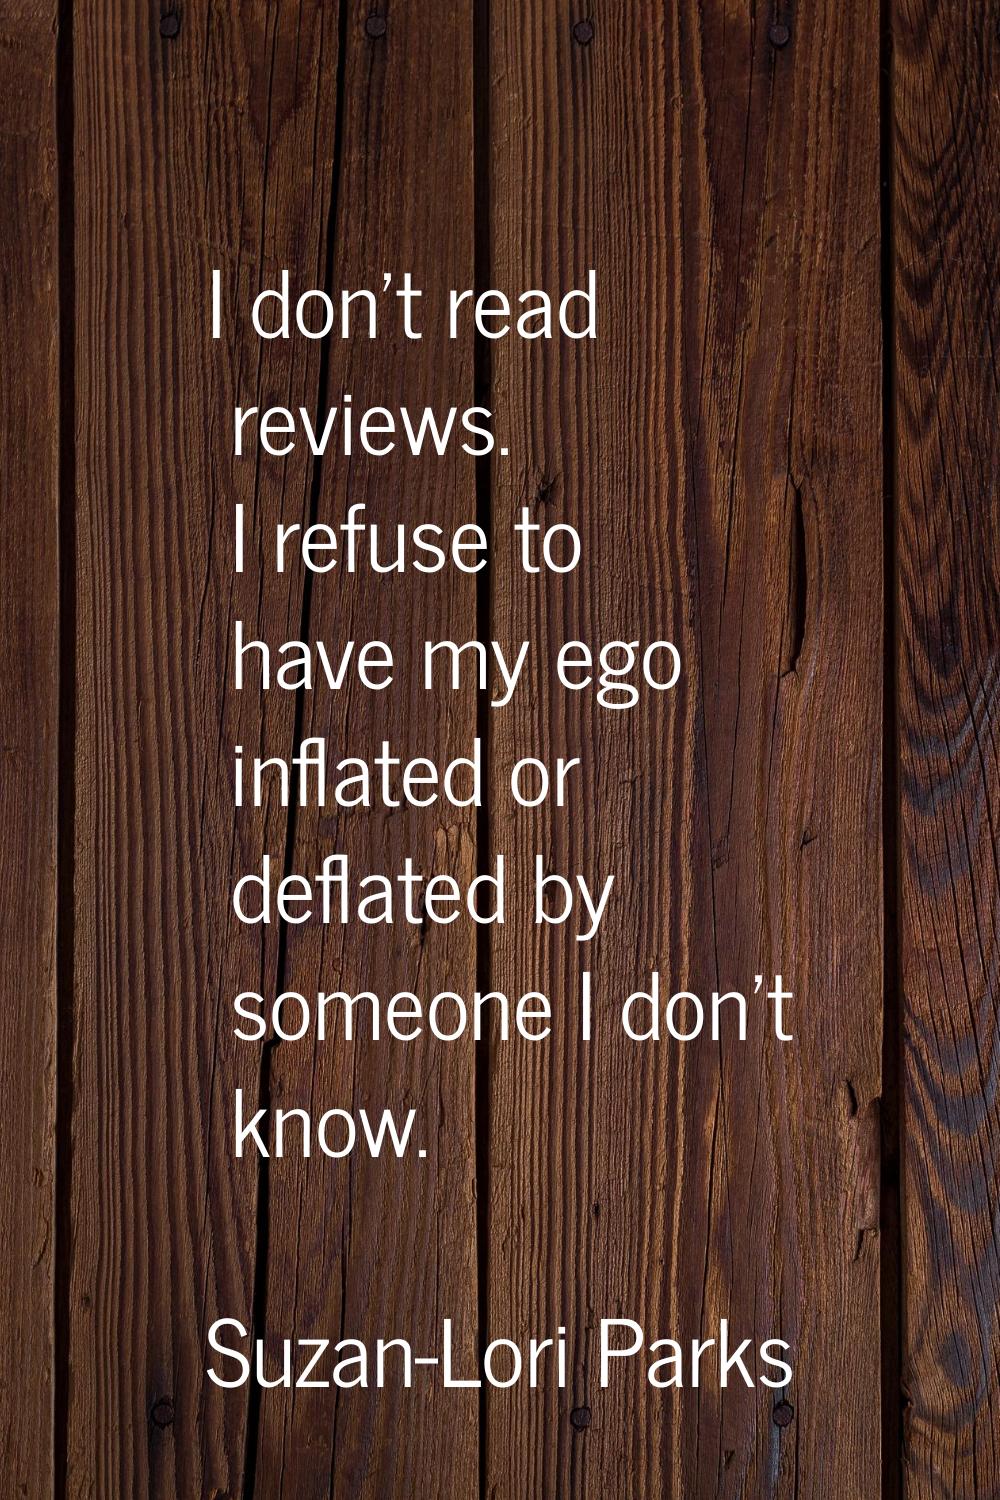 I don't read reviews. I refuse to have my ego inflated or deflated by someone I don't know.